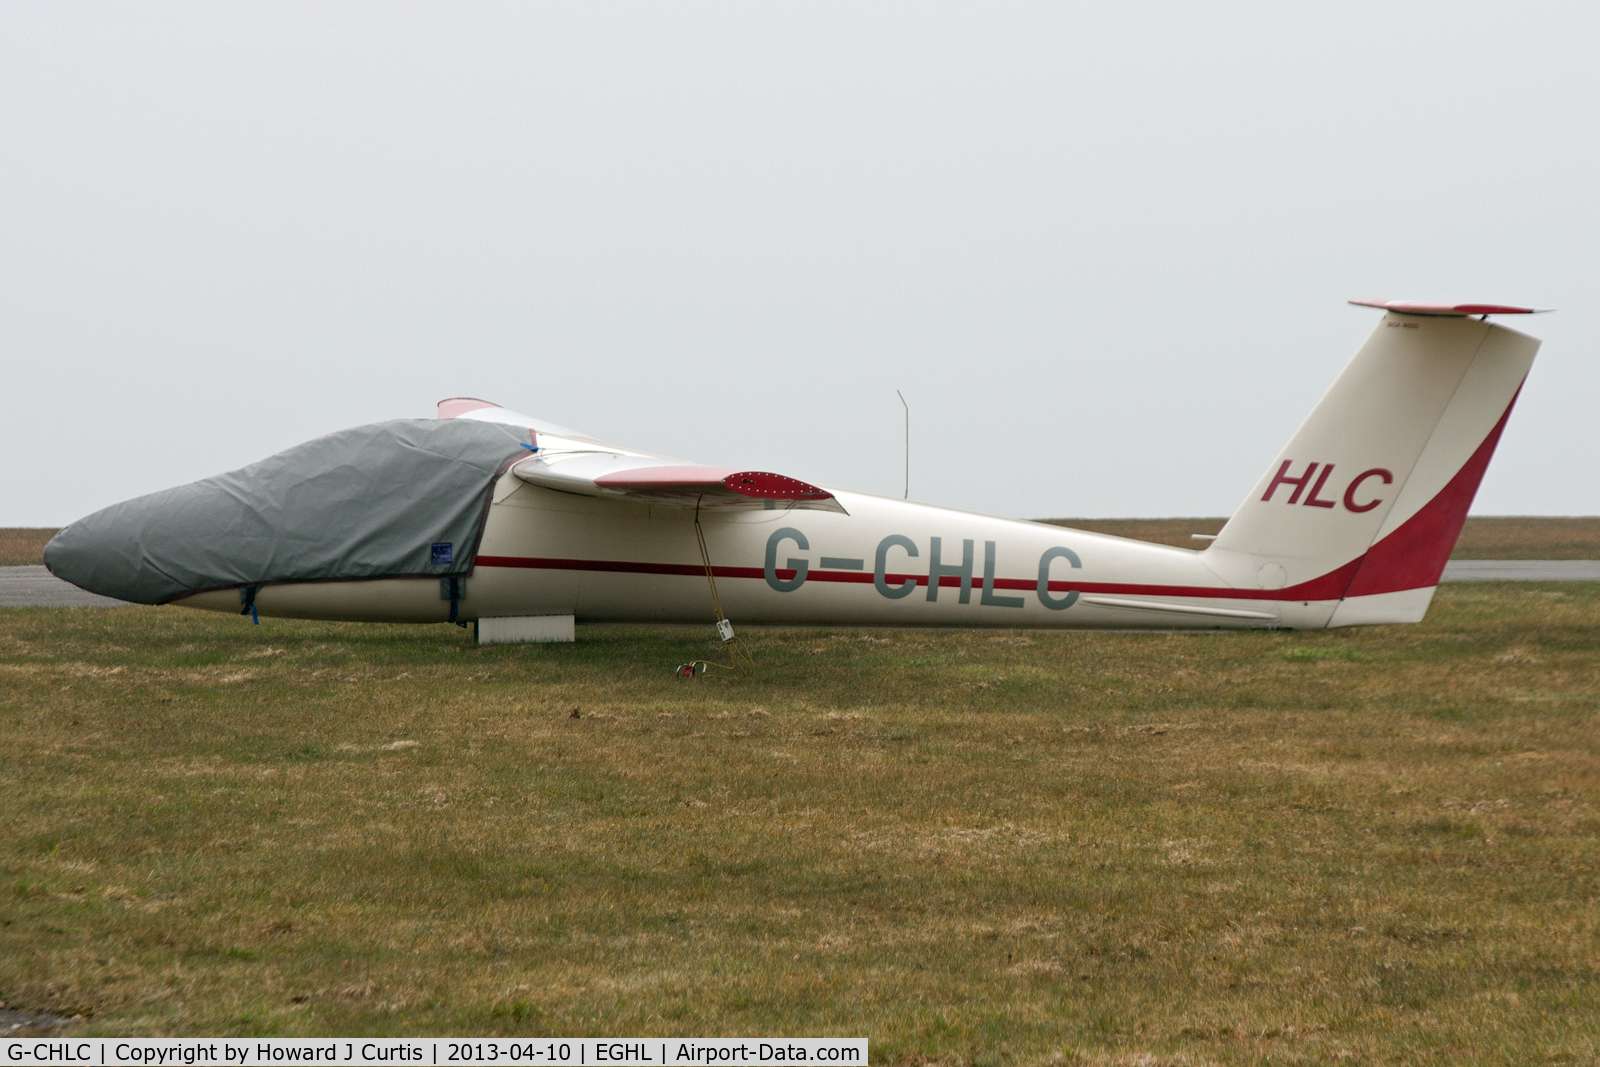 G-CHLC, 1974 Pilatus B4-PC11AF C/N 177, Privately owned. Coded HLC.